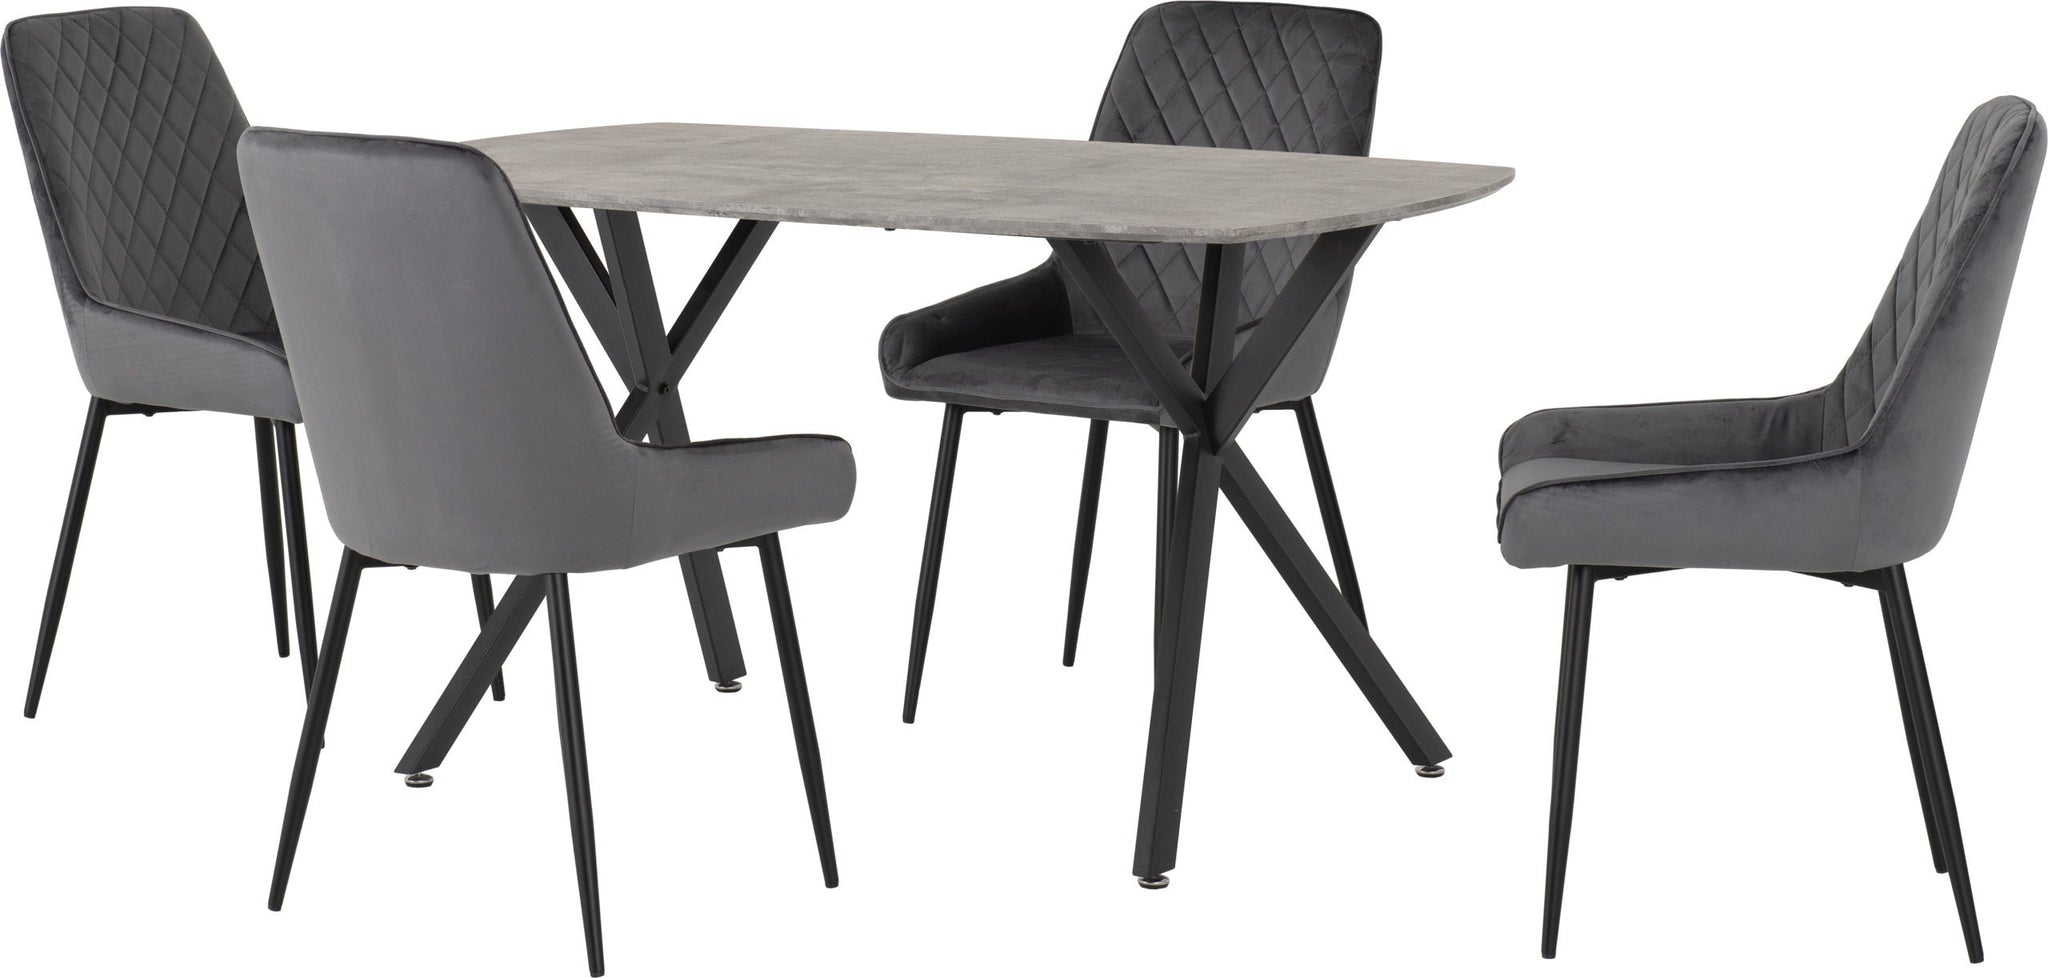 Athens Rectangular Dining Set with Avery Chairs - Concrete Effect/Black/Grey Velvet- The Right Buy Store